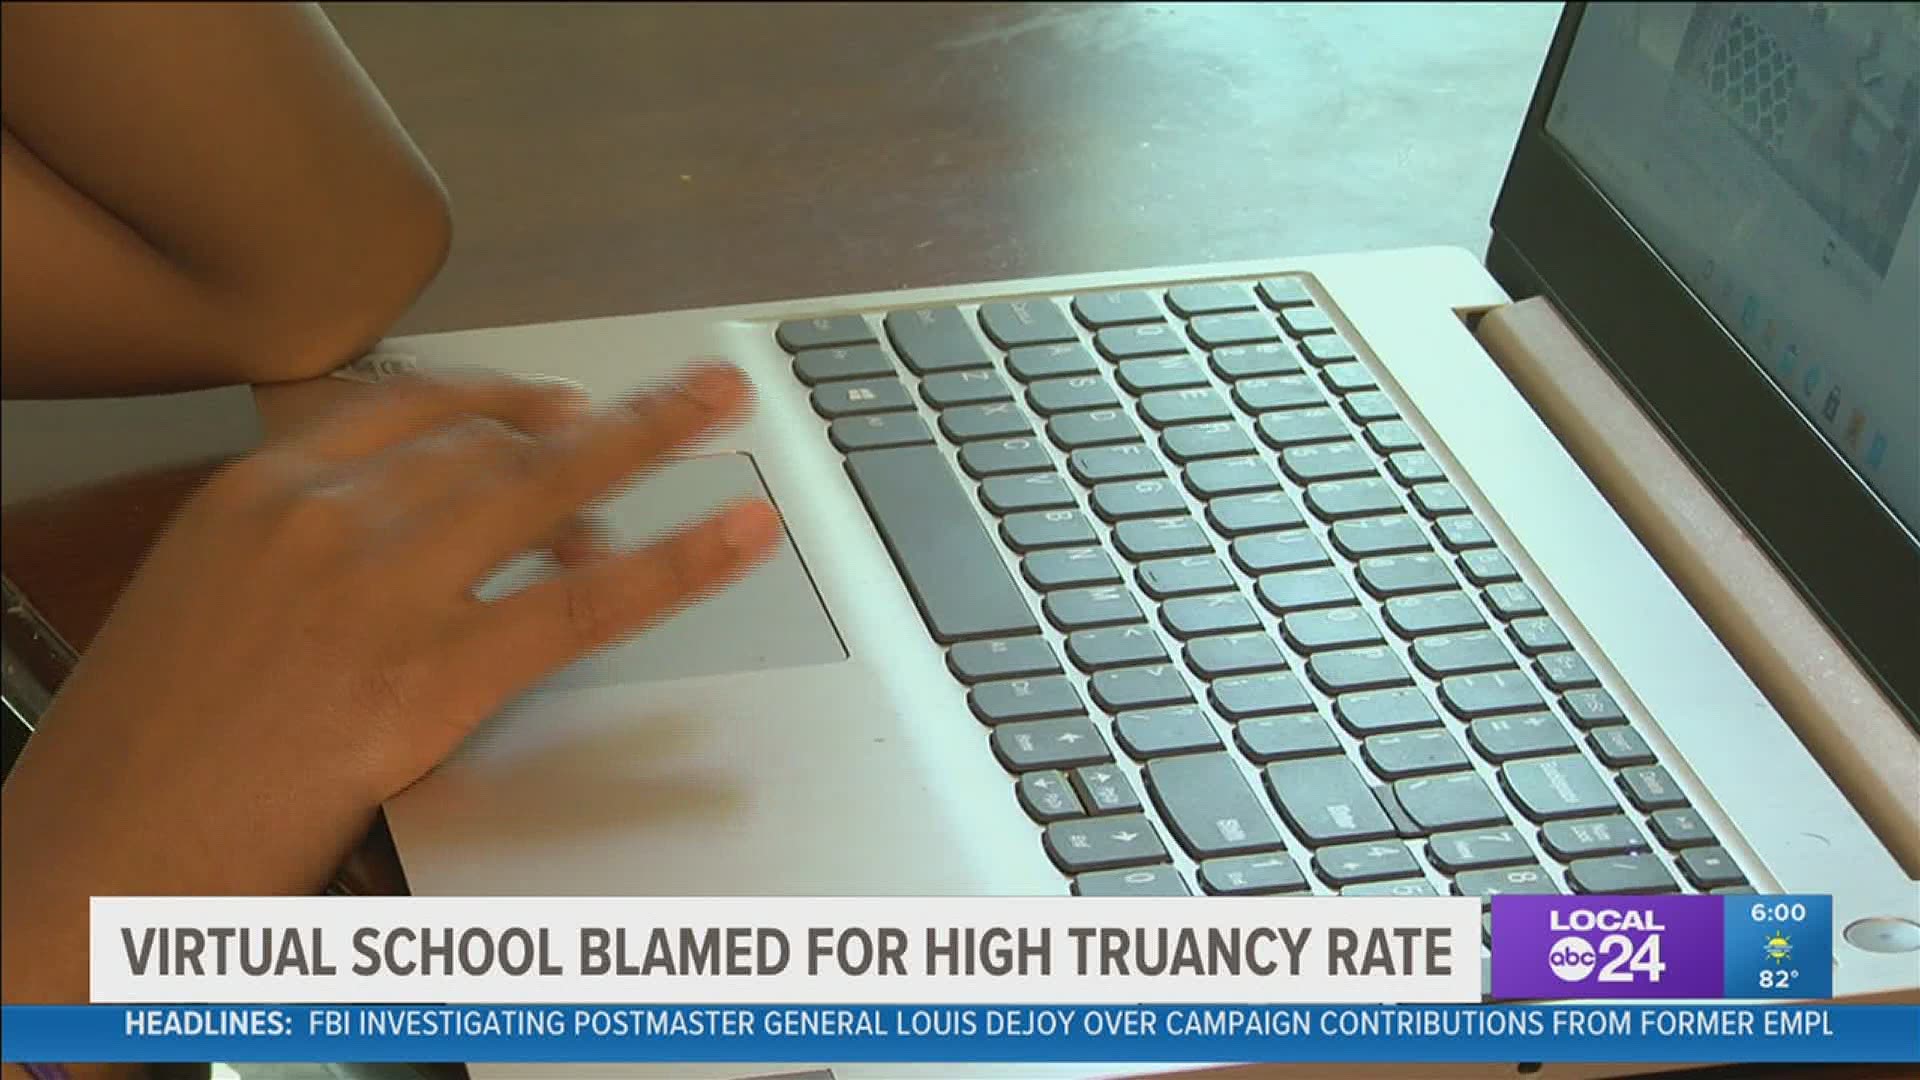 1 of 5 parents were sent warning letters, some charged with educational neglect. Parents blame virtual school issues.